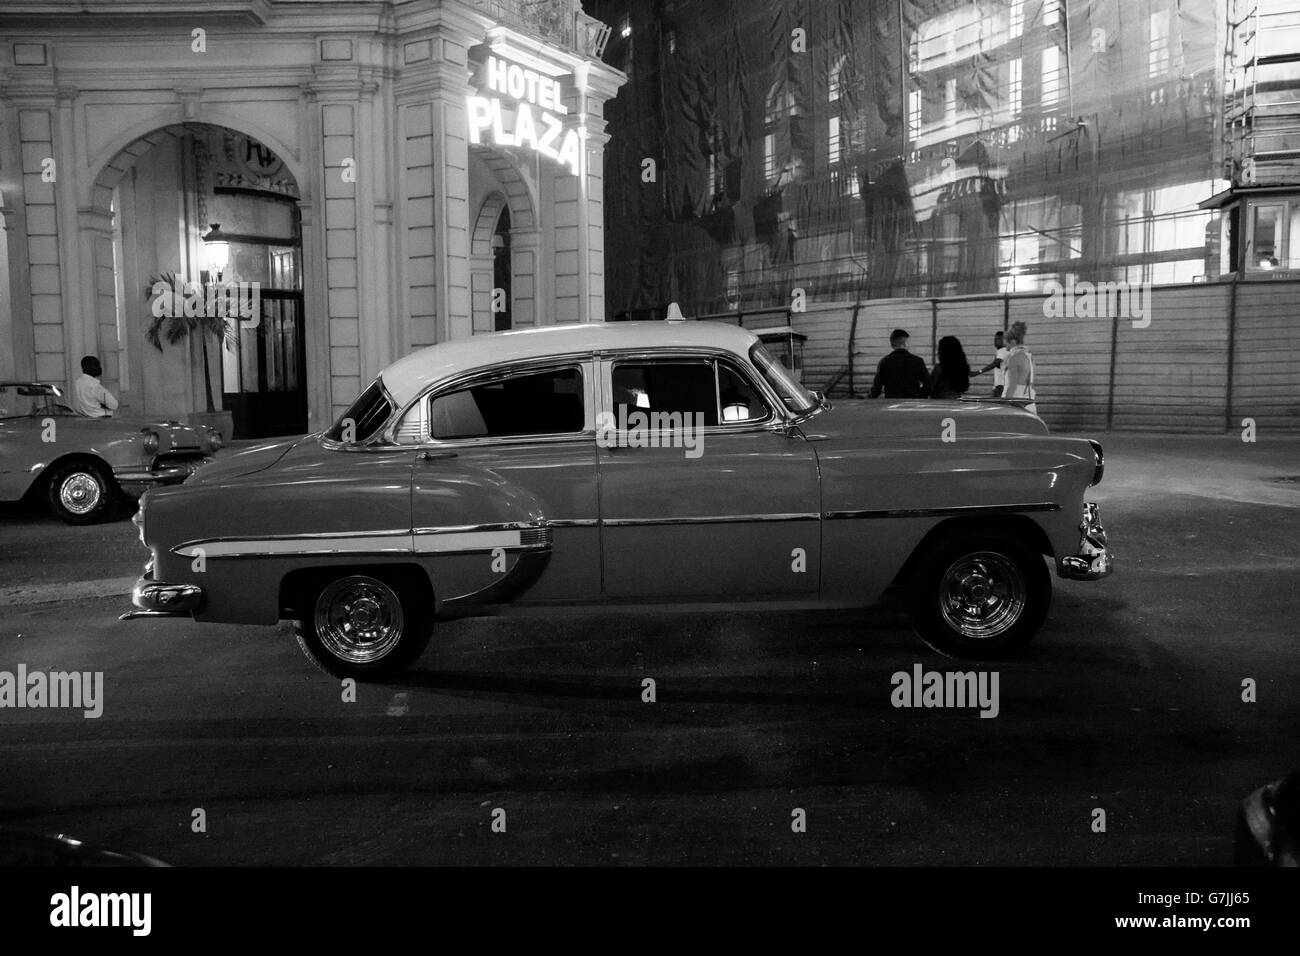 Streets of Old Havana at night with old American car. Black & white image Stock Photo